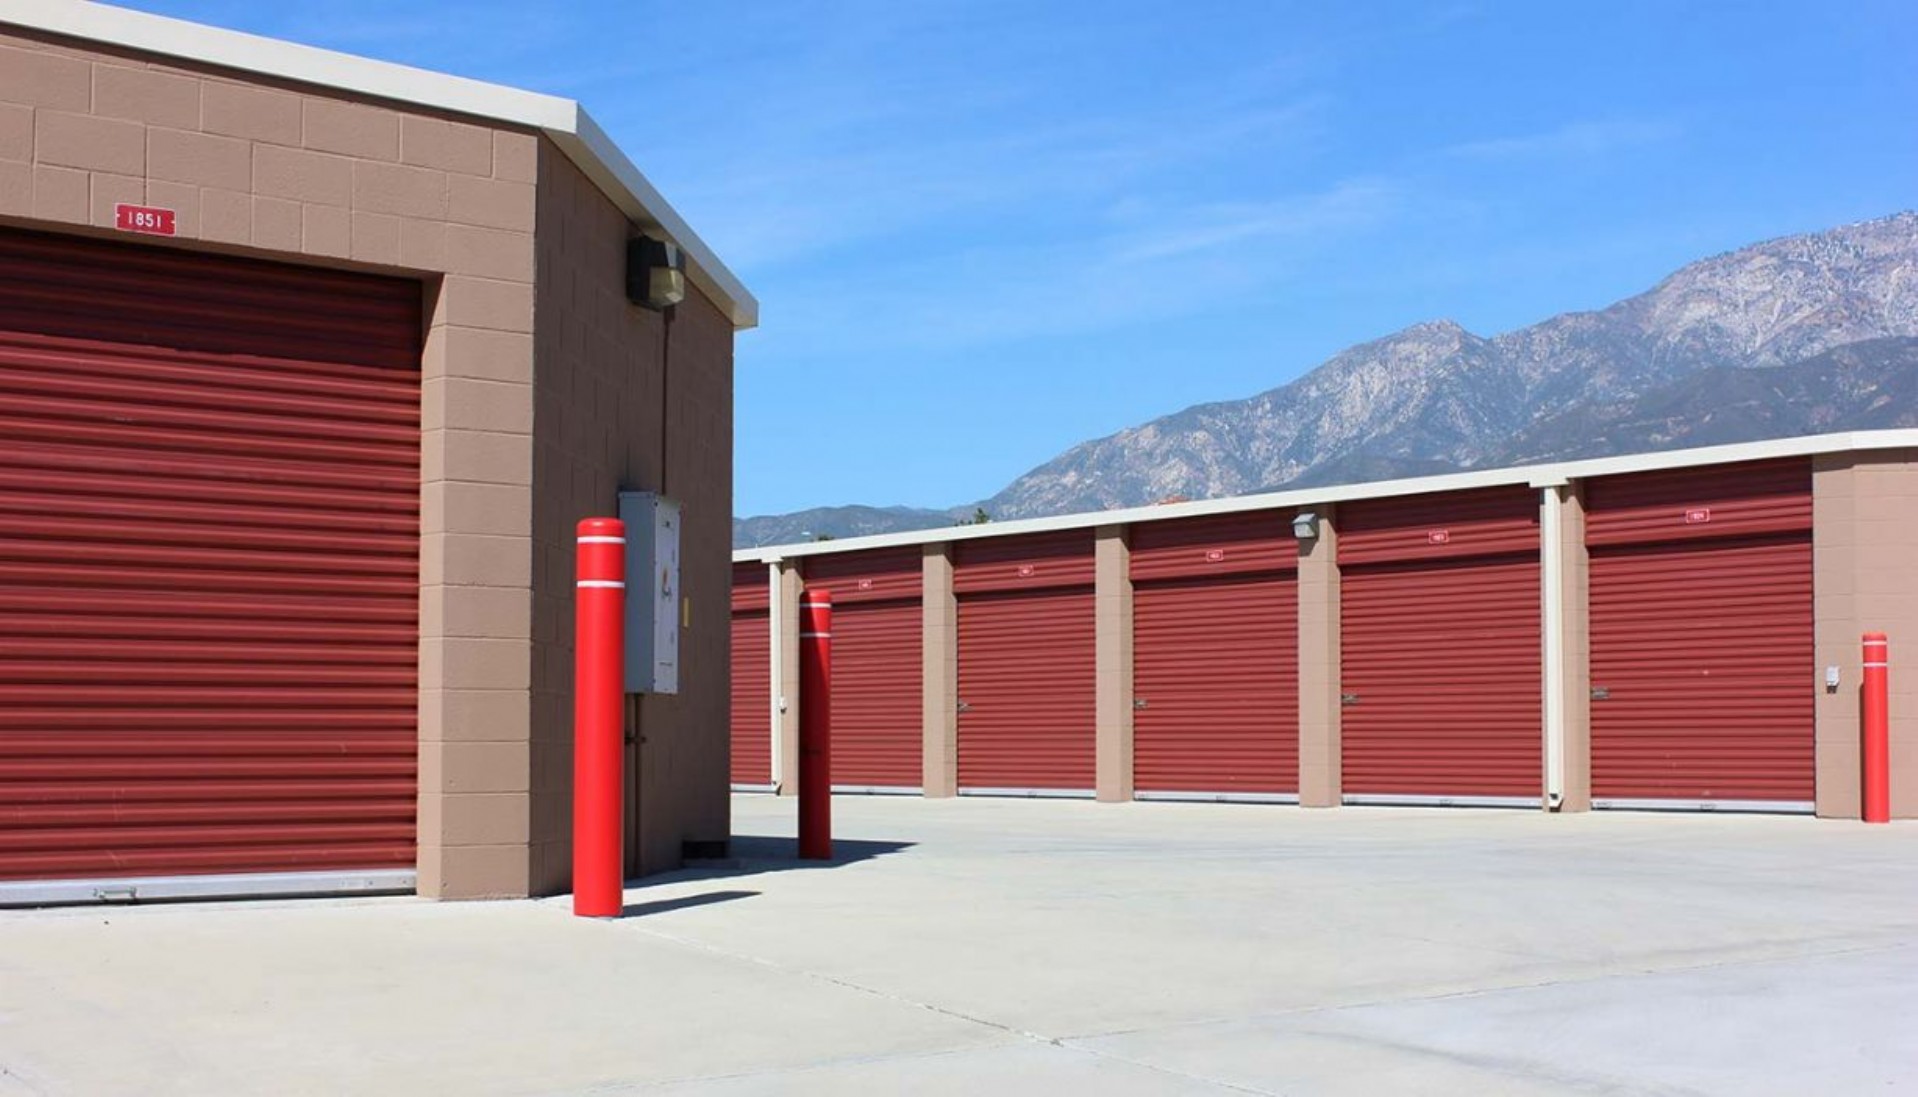 Self Storage in Rancho Cucamonga on Haven Ave | Price Self Storage